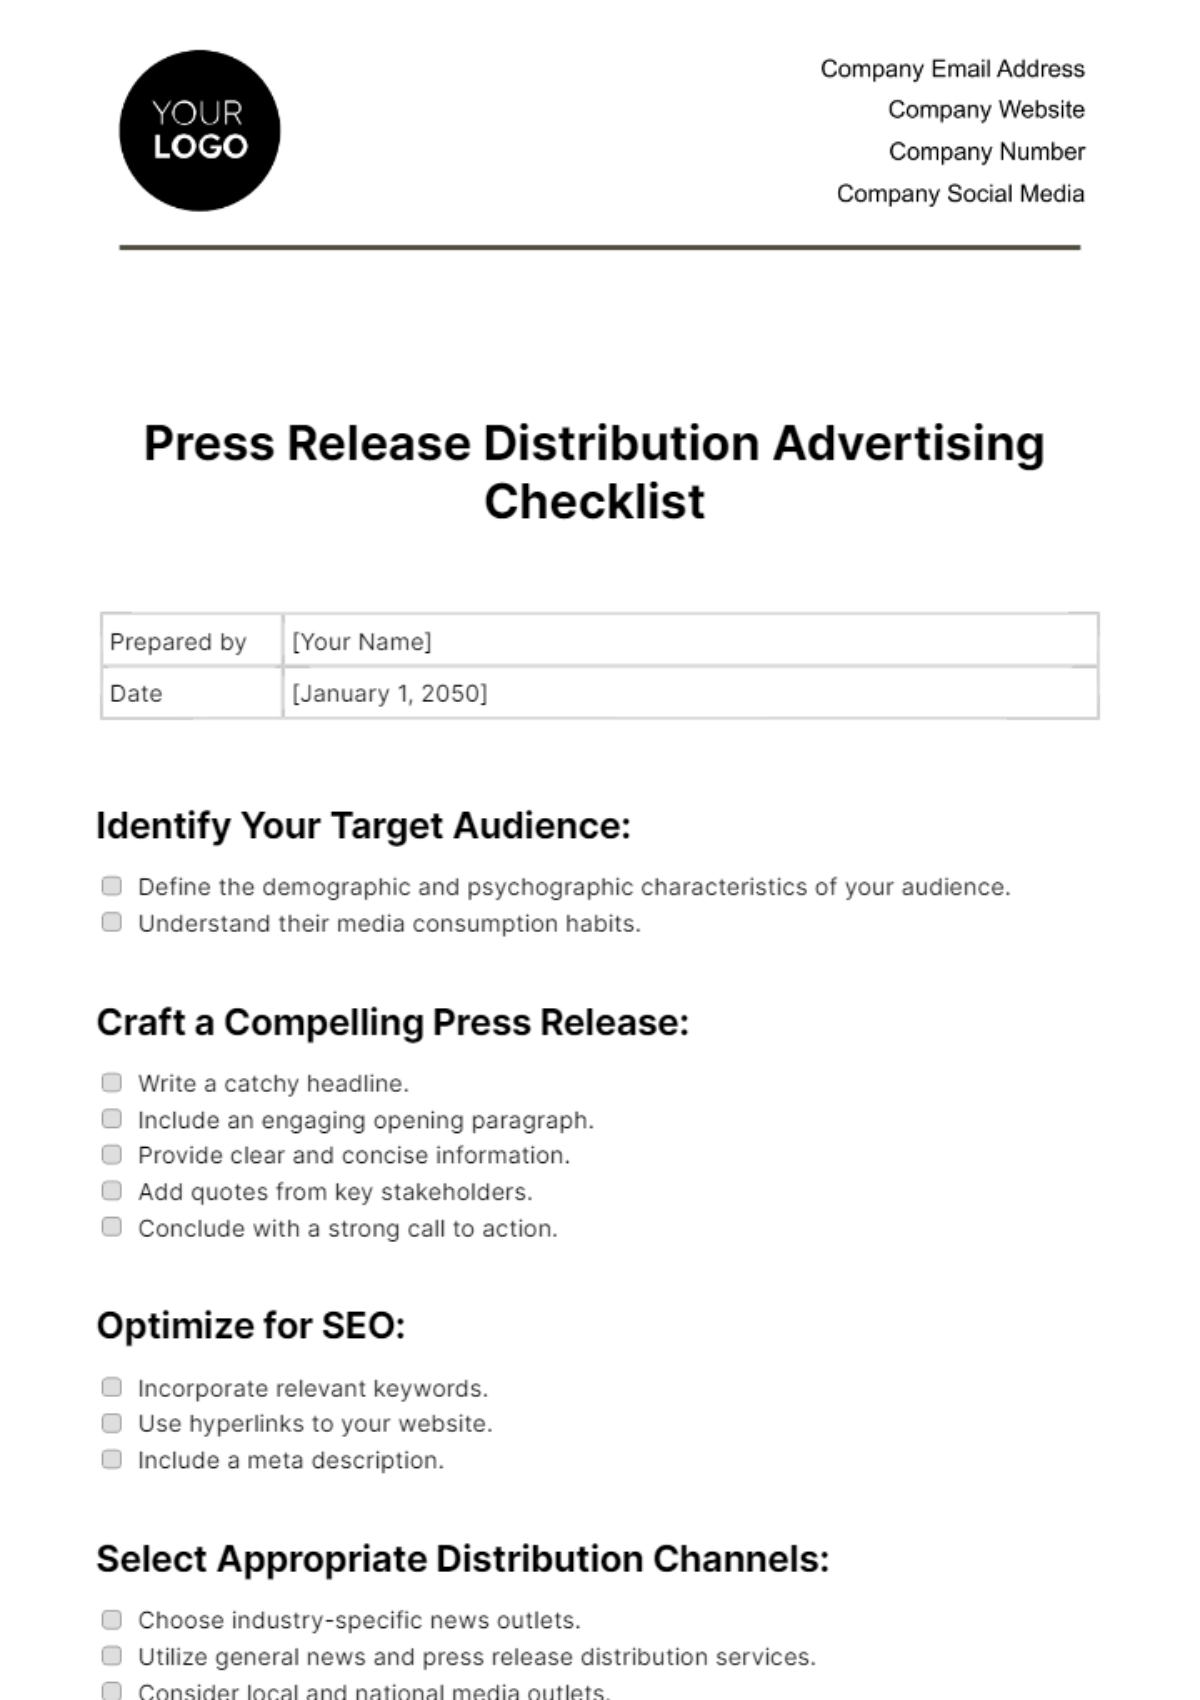 Press Release Distribution Advertising Checklist Template